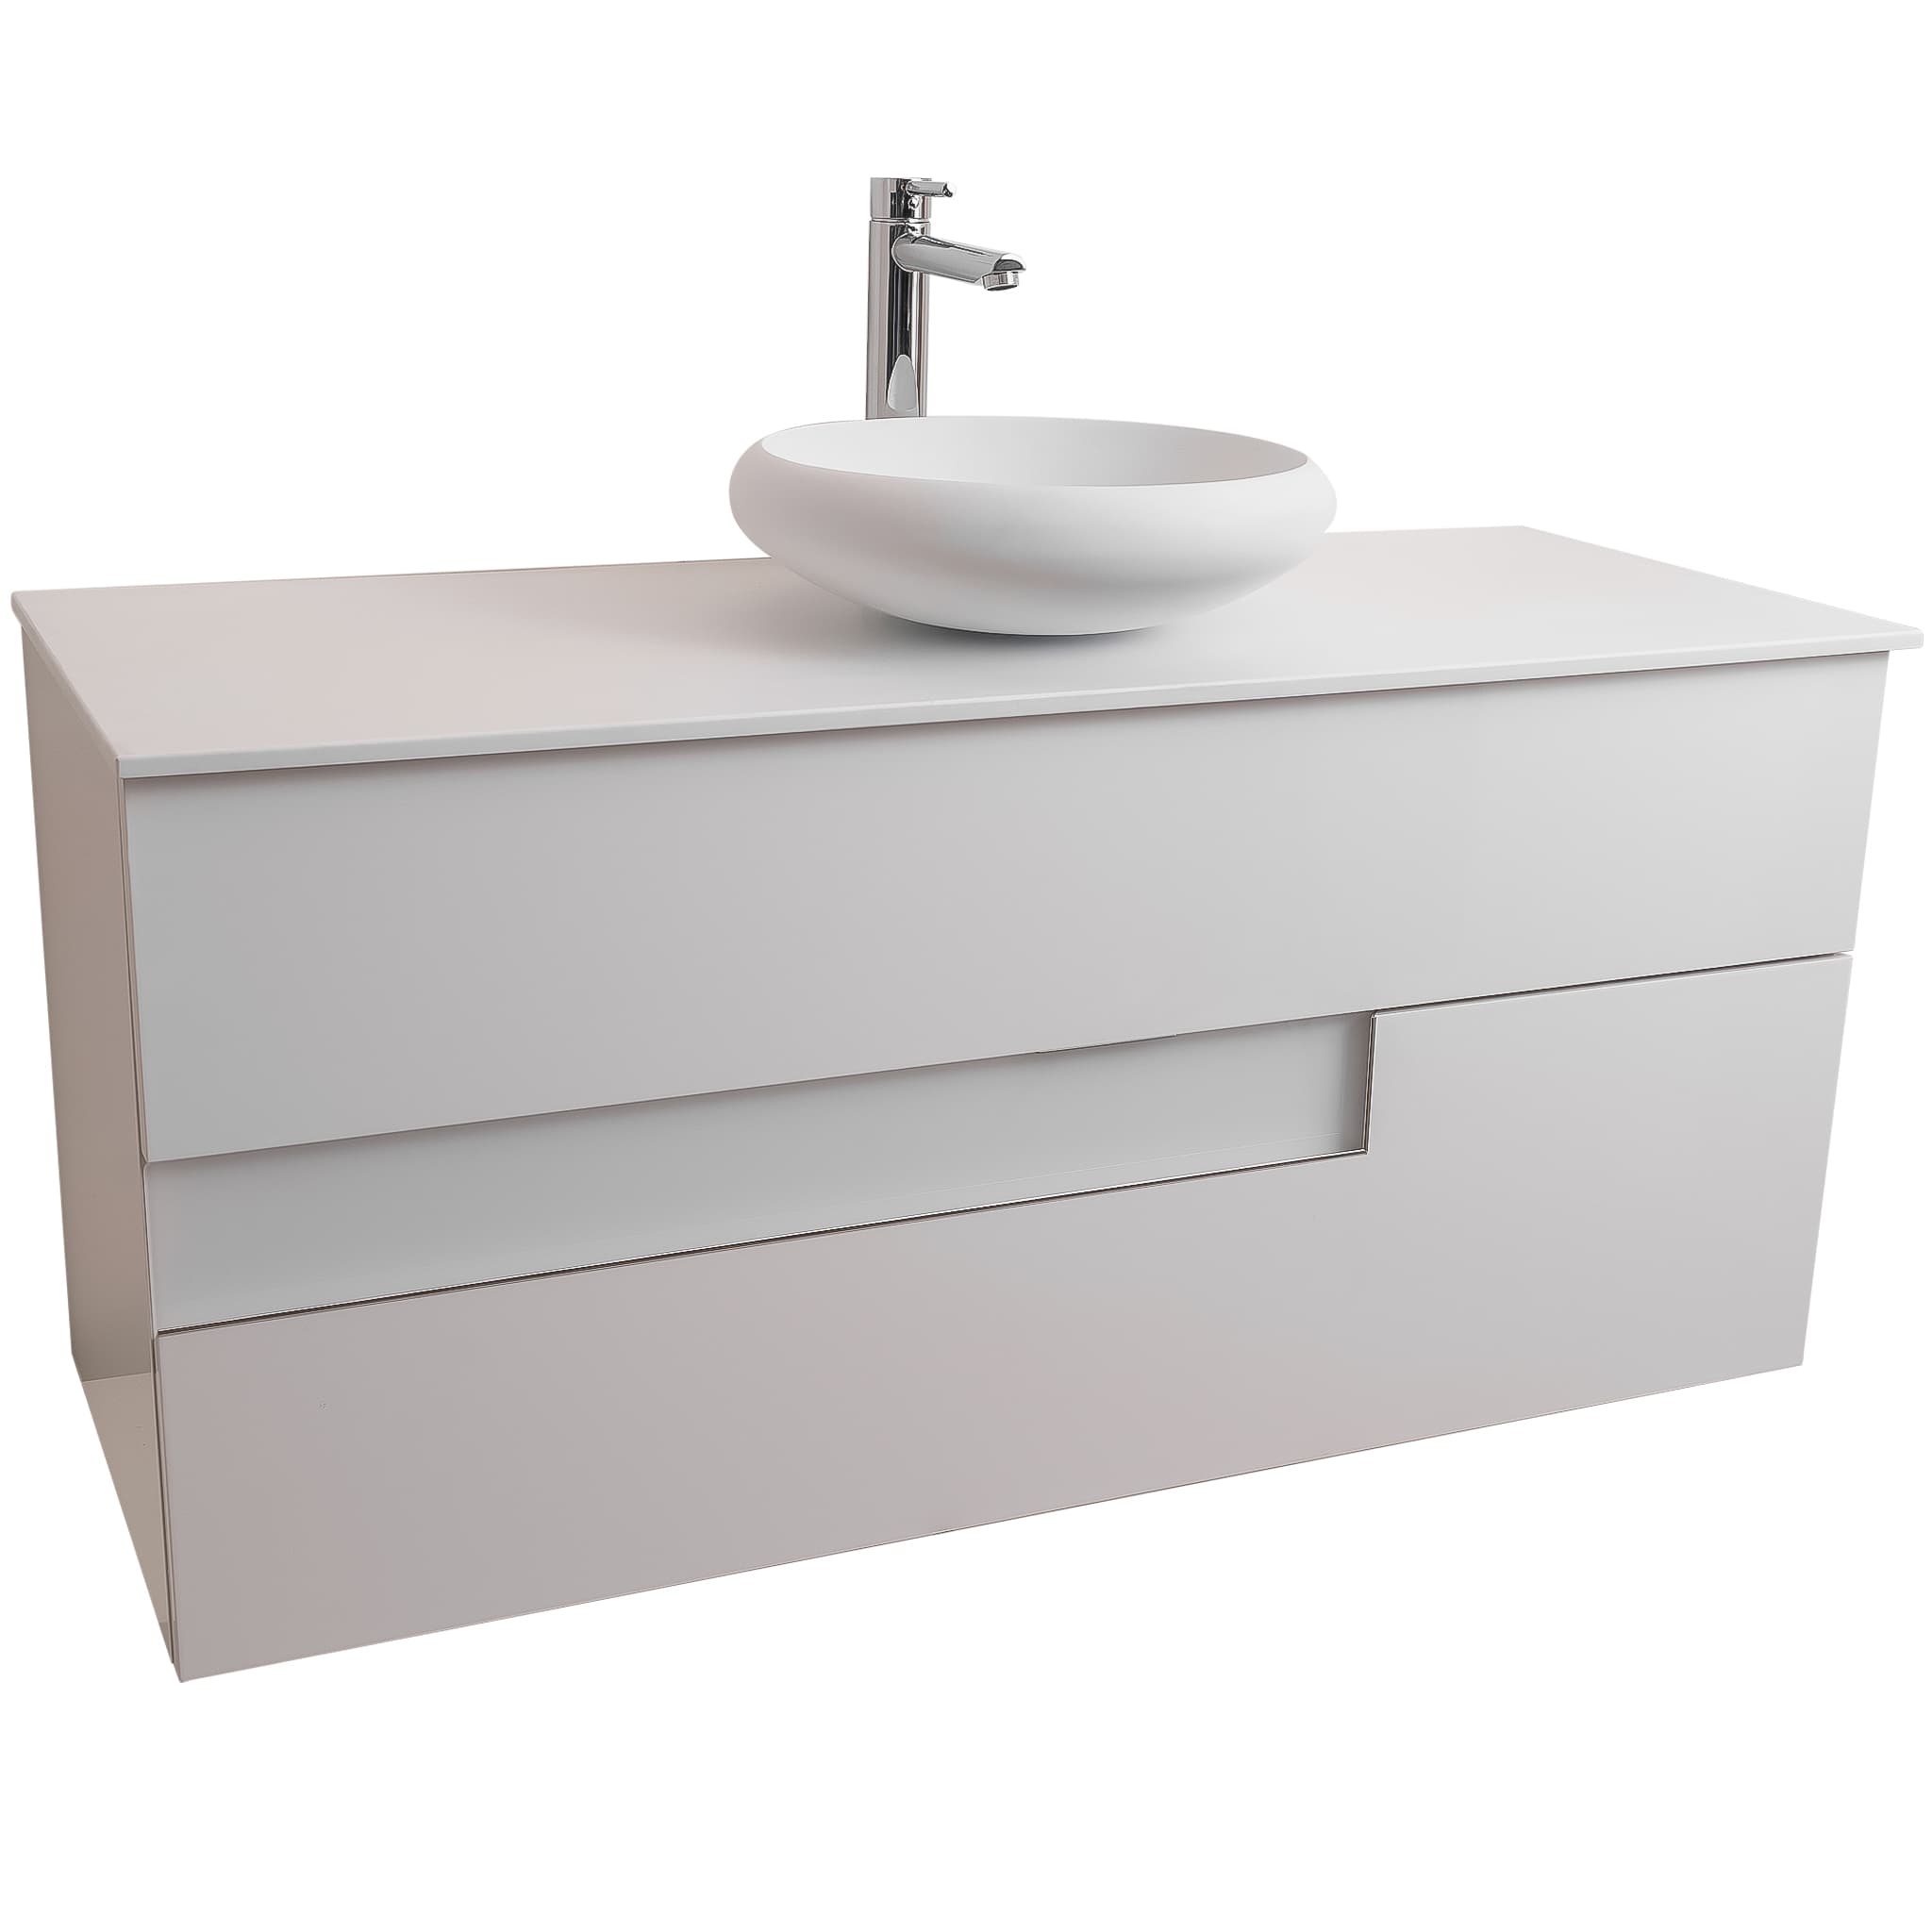 Vision 47.5 White High Gloss Cabinet, Solid Surface Flat White Counter And Round Solid Surface White Basin 1153, Wall Mounted Modern Vanity Set